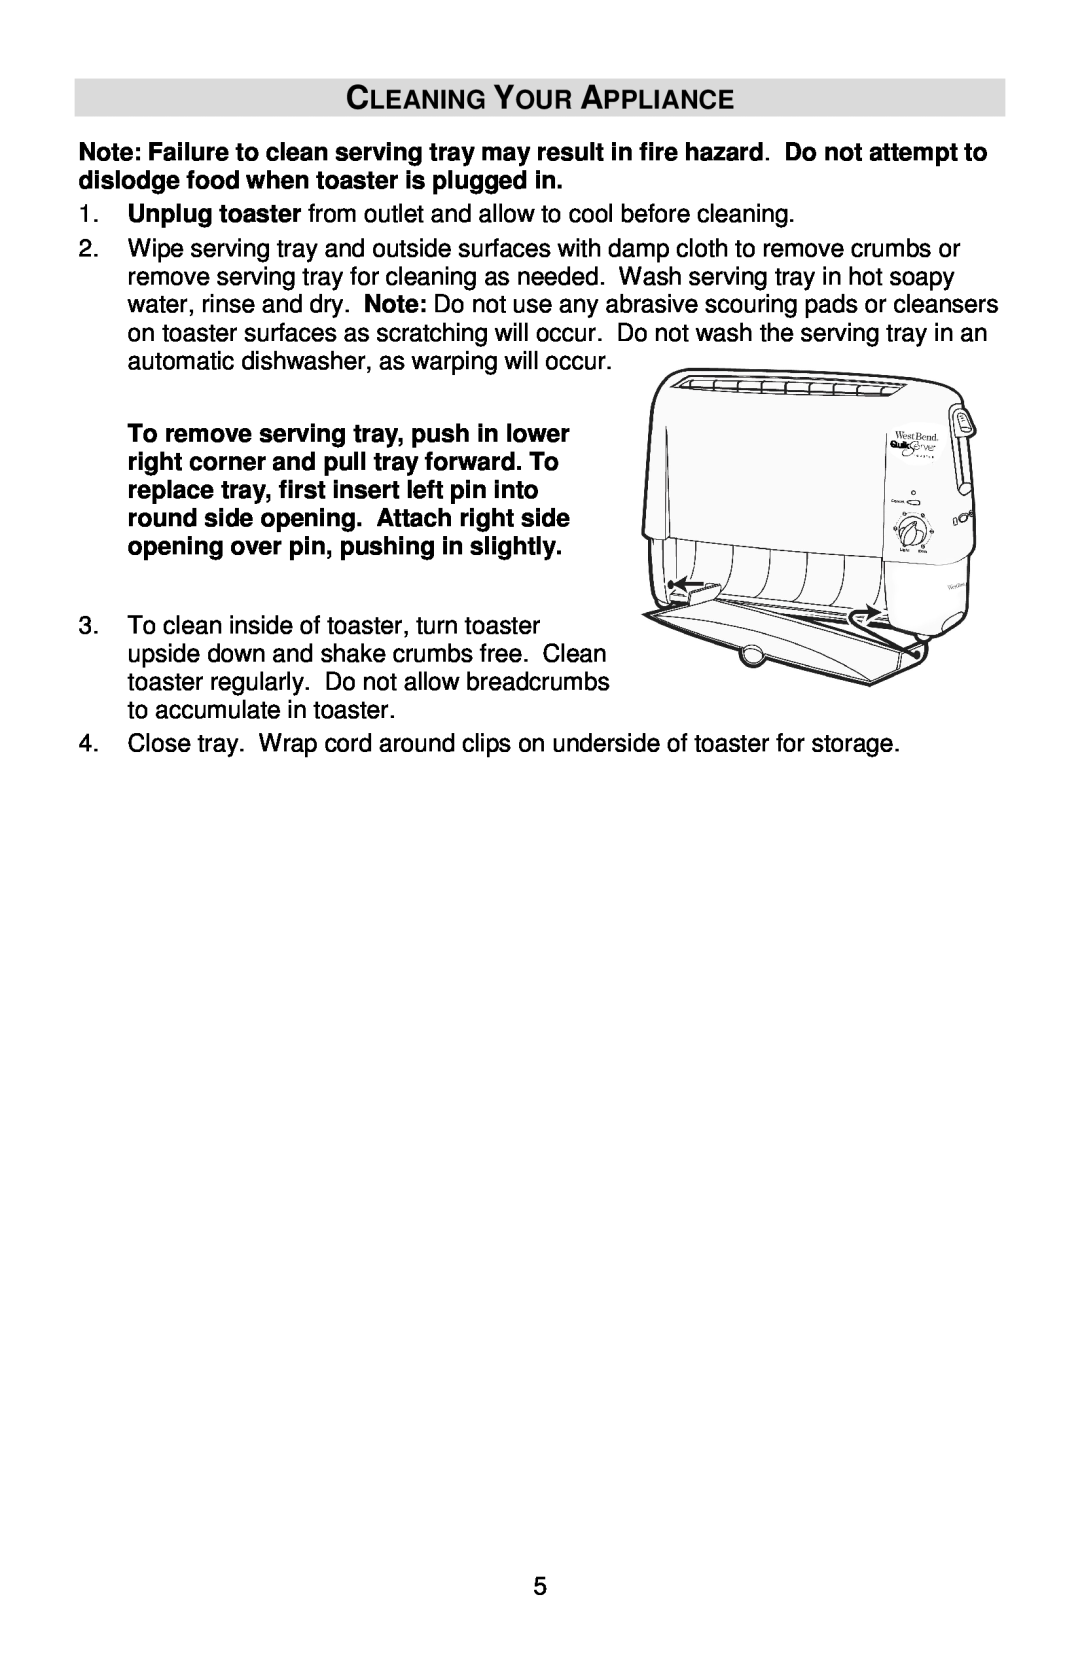 West Bend 643-050 instruction manual Cleaning Your Appliance 